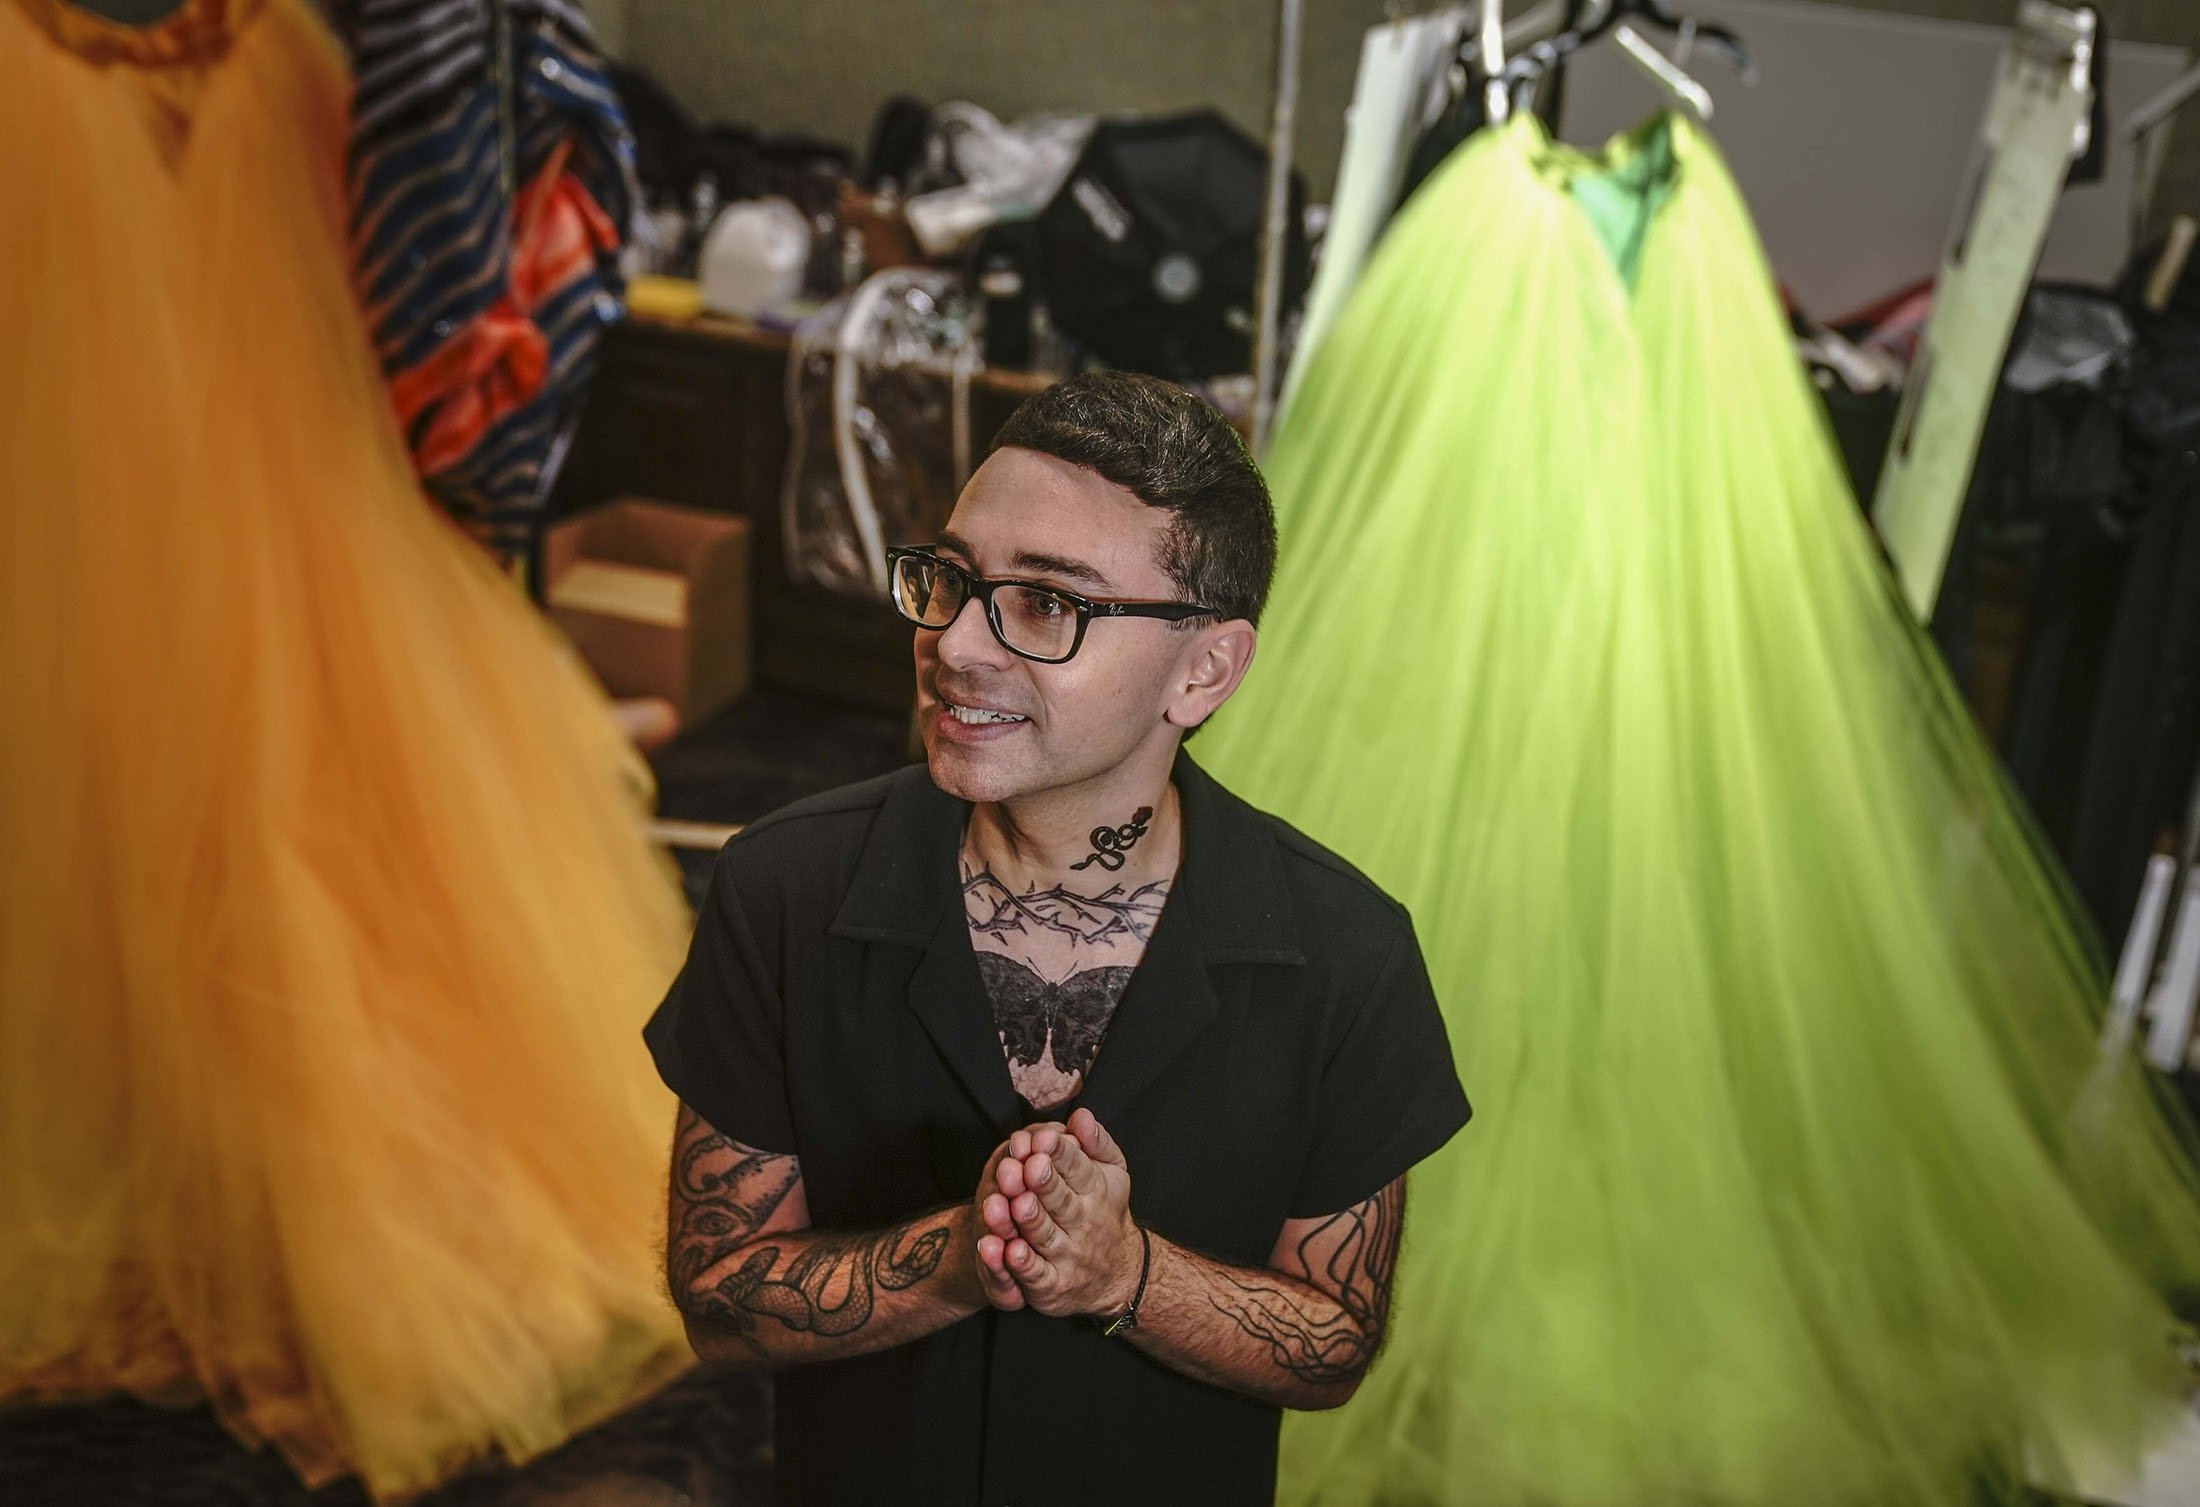 NY Fashion Week underway with Christian Siriano's dazzling colors